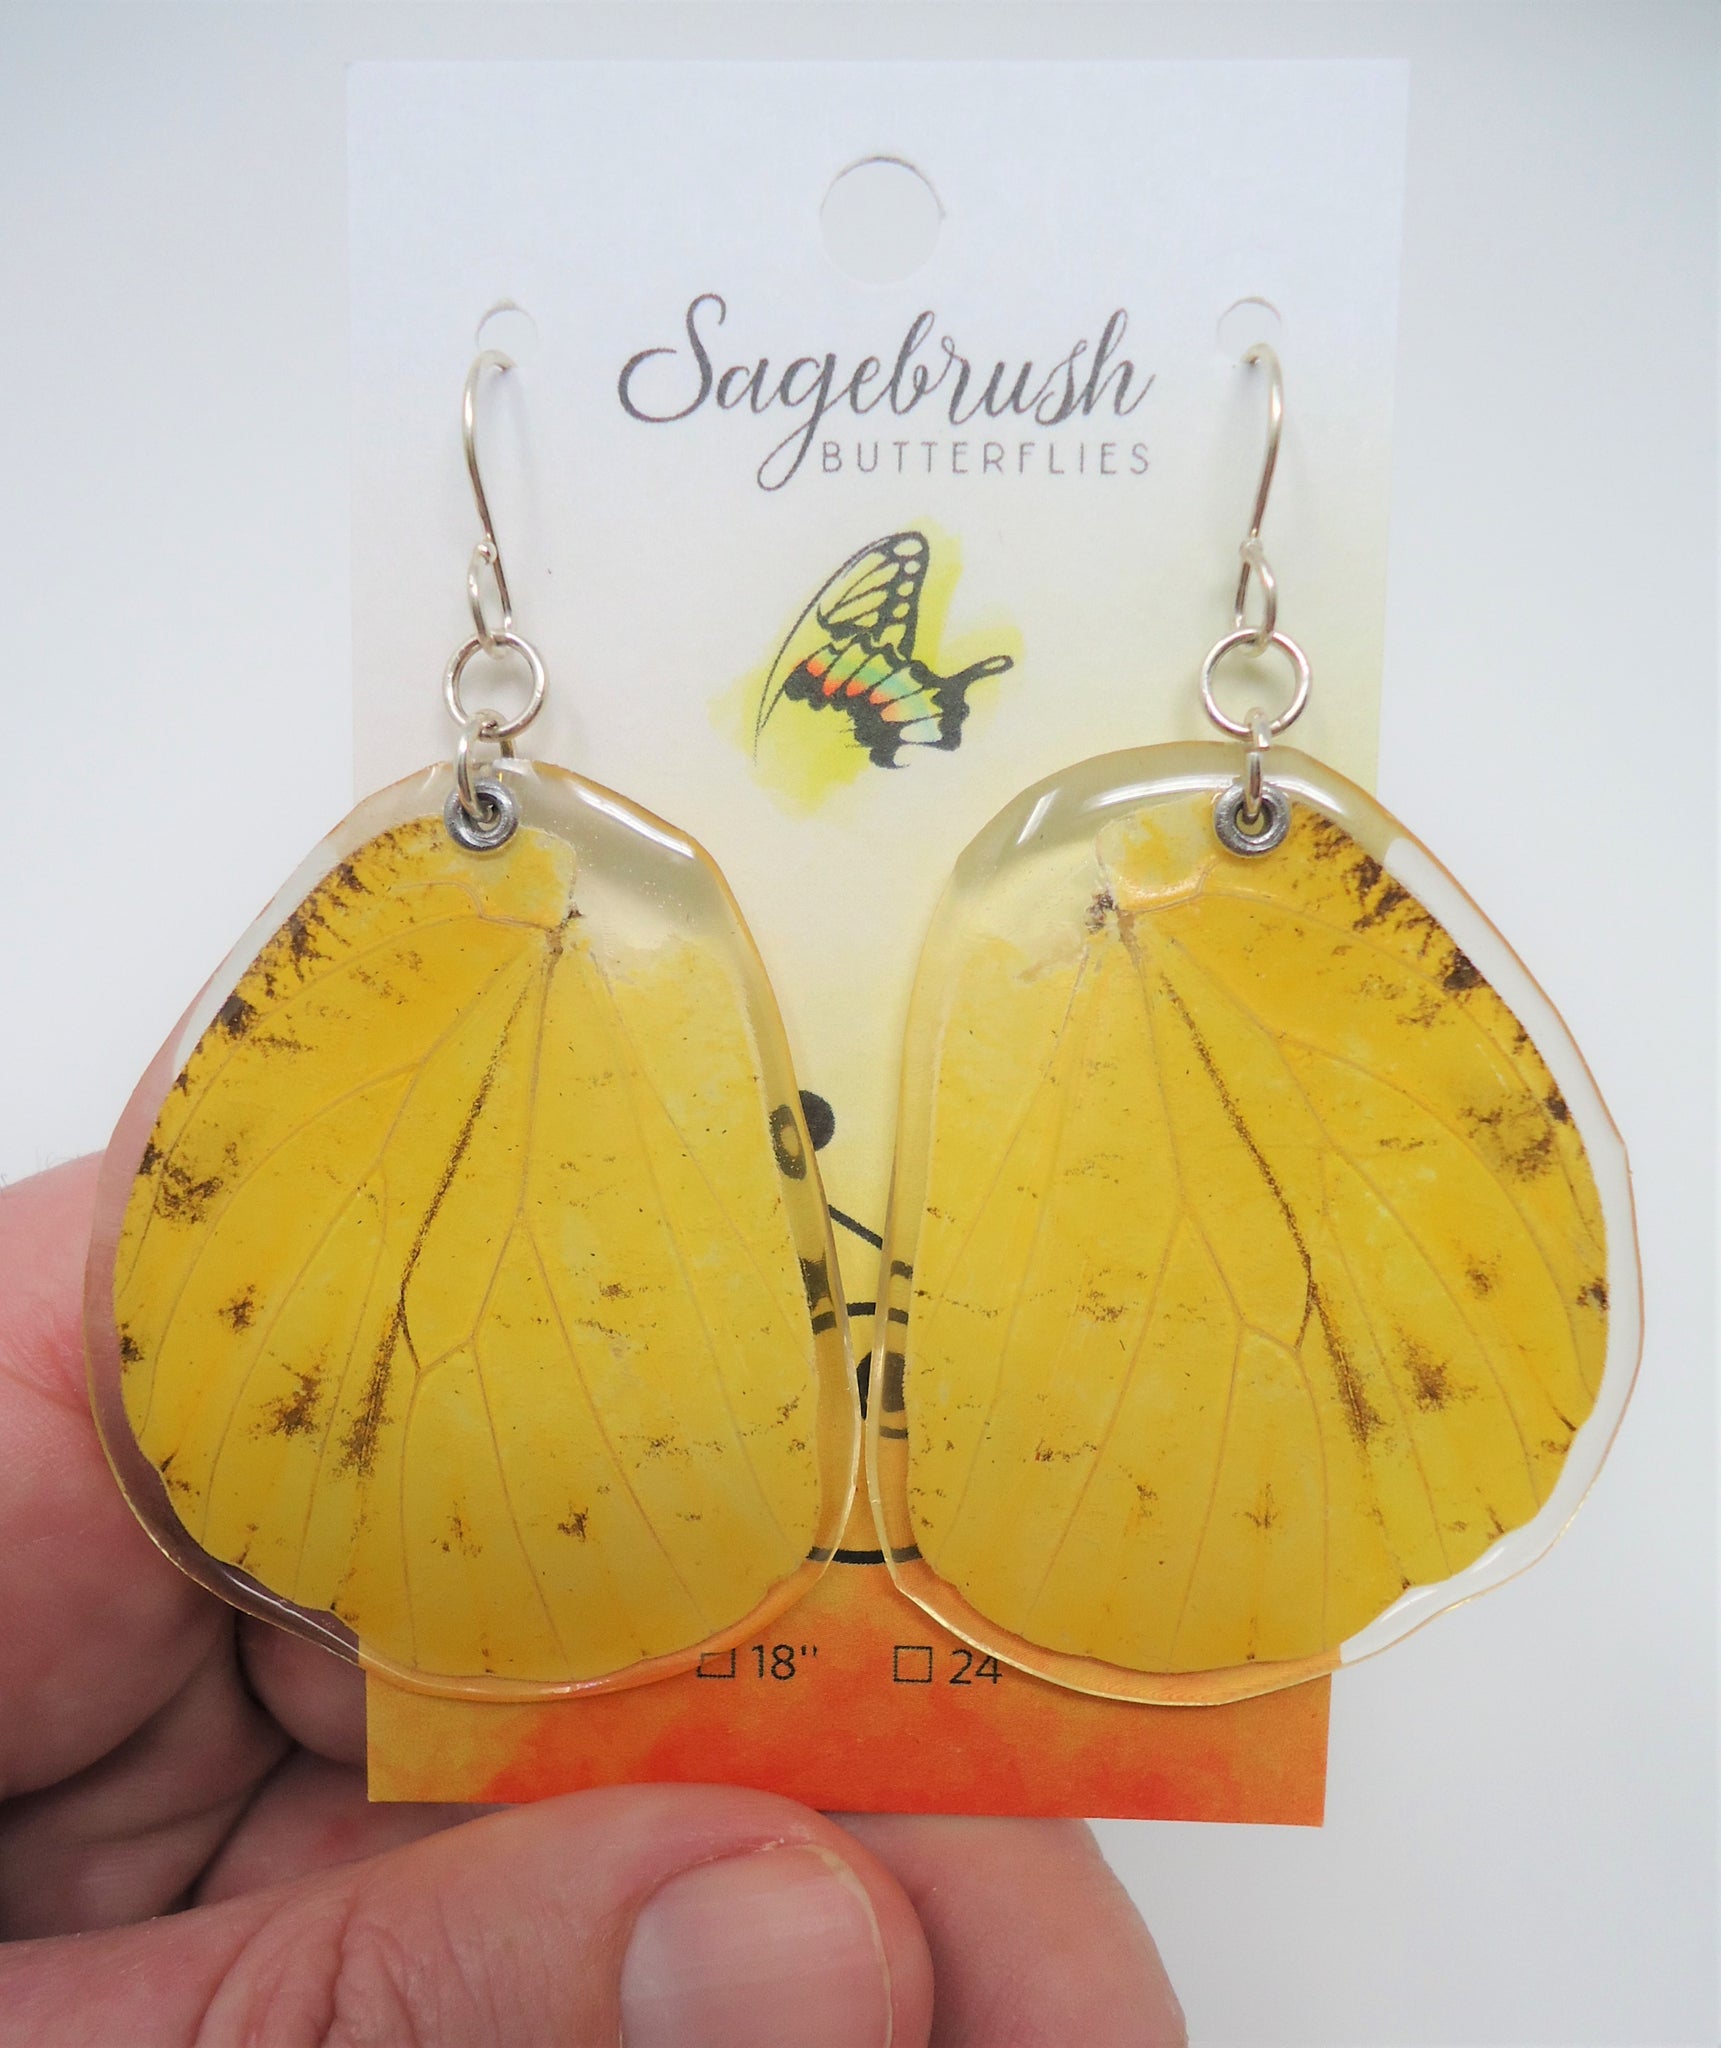 Amazon.com: Real butterfly wing earrings (Top wings) Real Butterfly earrings/Phoebis  philea/Real preserved laminated resining Butterfly Ear Dangles/ 925  sterling silver/Yellow butterfly : Handmade Products